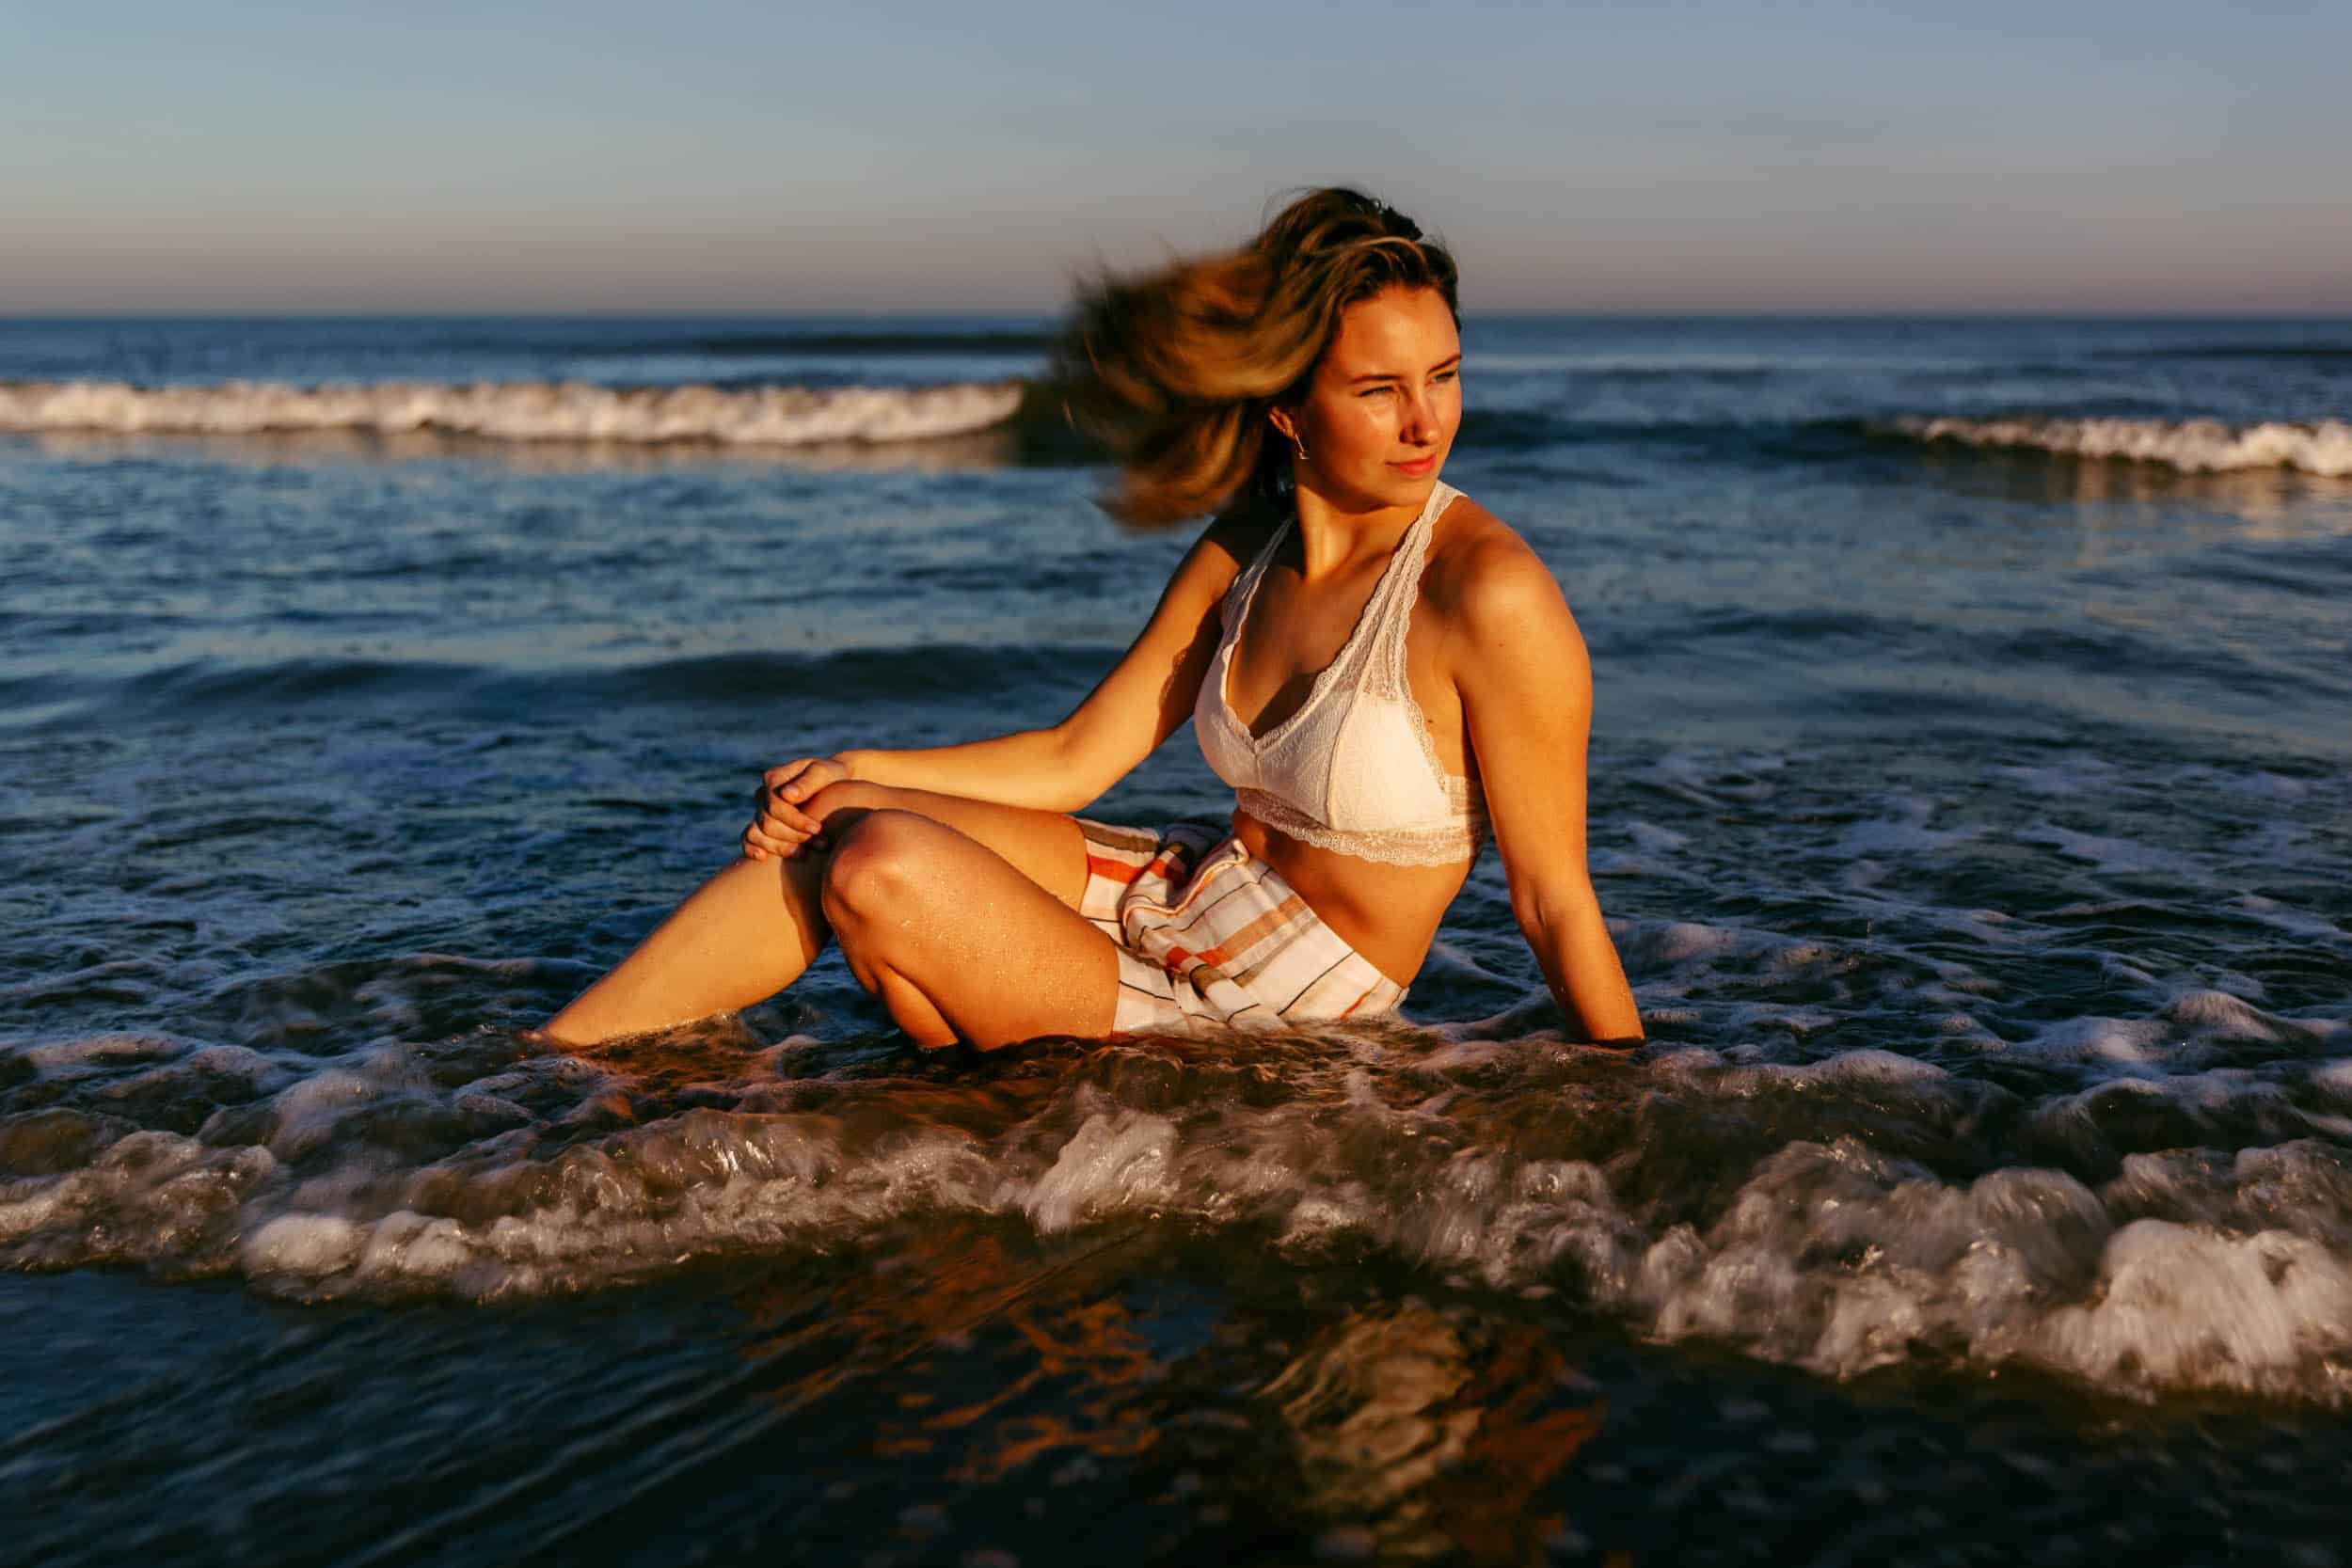 A woman poses for a photo shoot on the beach surrounded by the ocean.